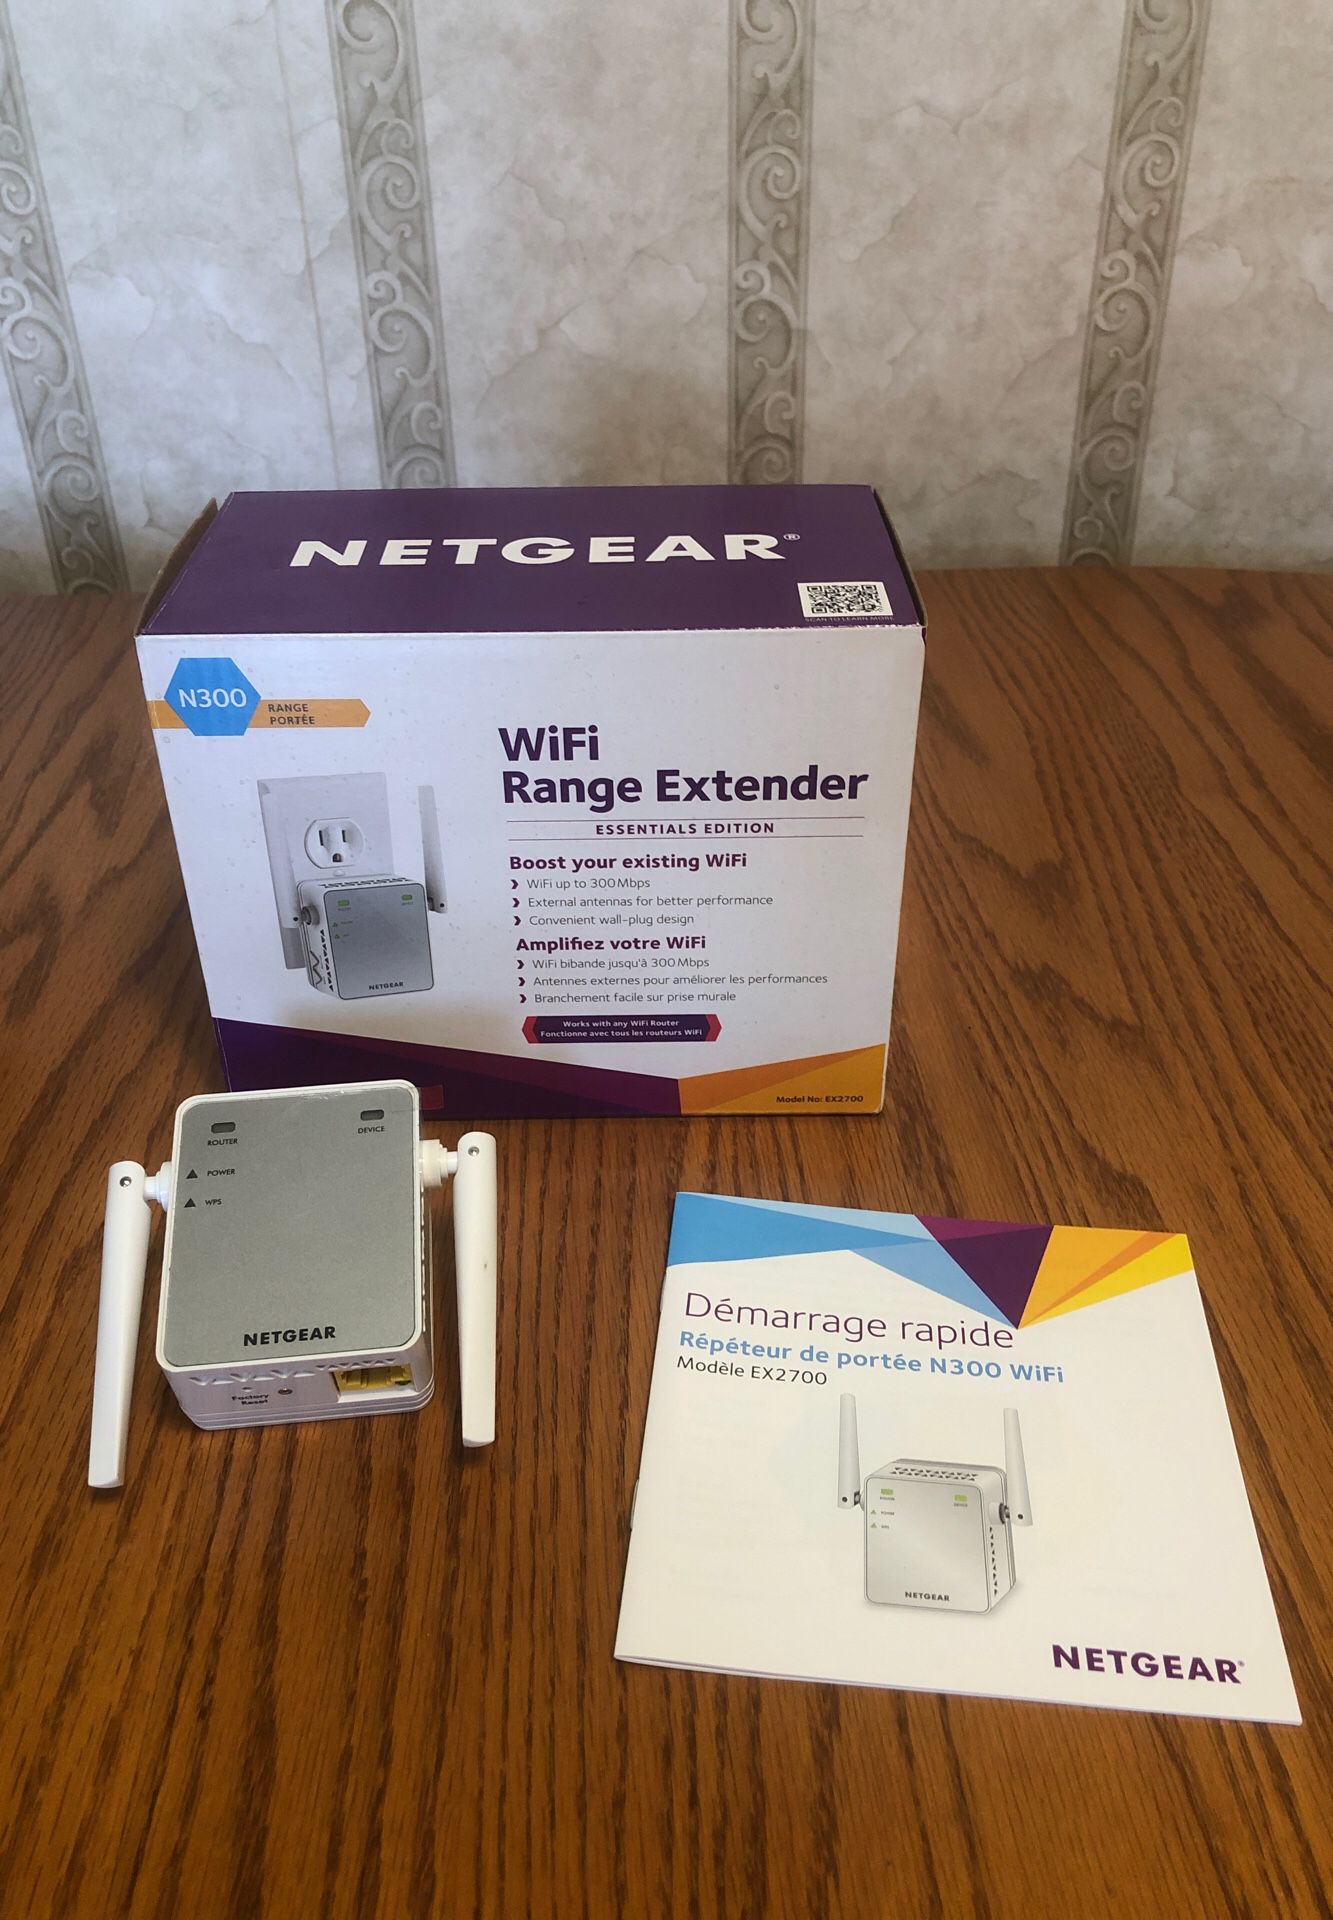 Netgear N300 Wifi Range Extender (EX2700) Works great, Original Box and Manual included